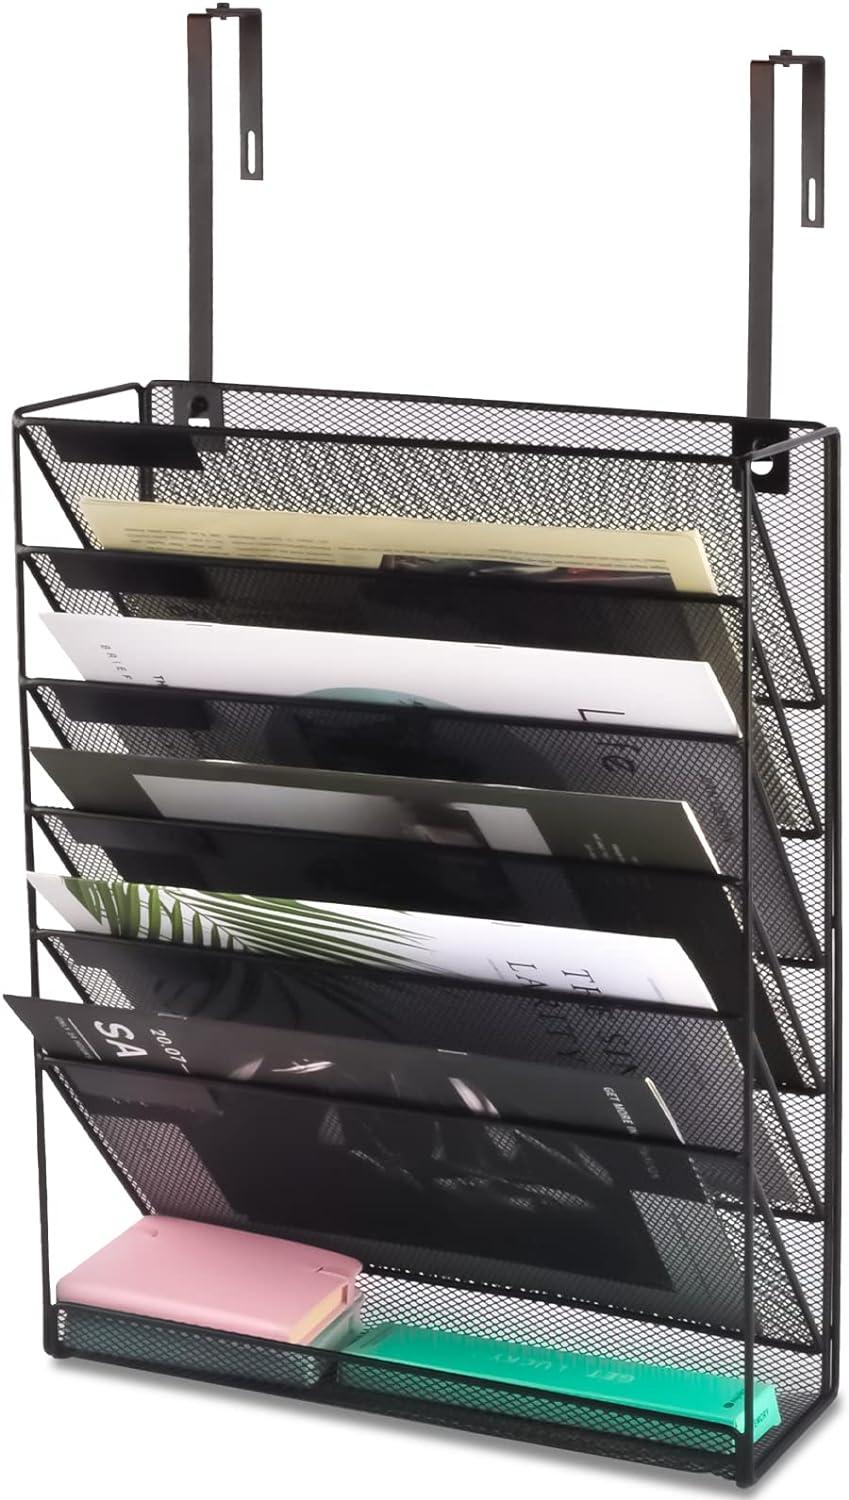 gdindinfan cubicle hanging file holder organizer 6 tier wall mount vertical document letter  gdindinfan